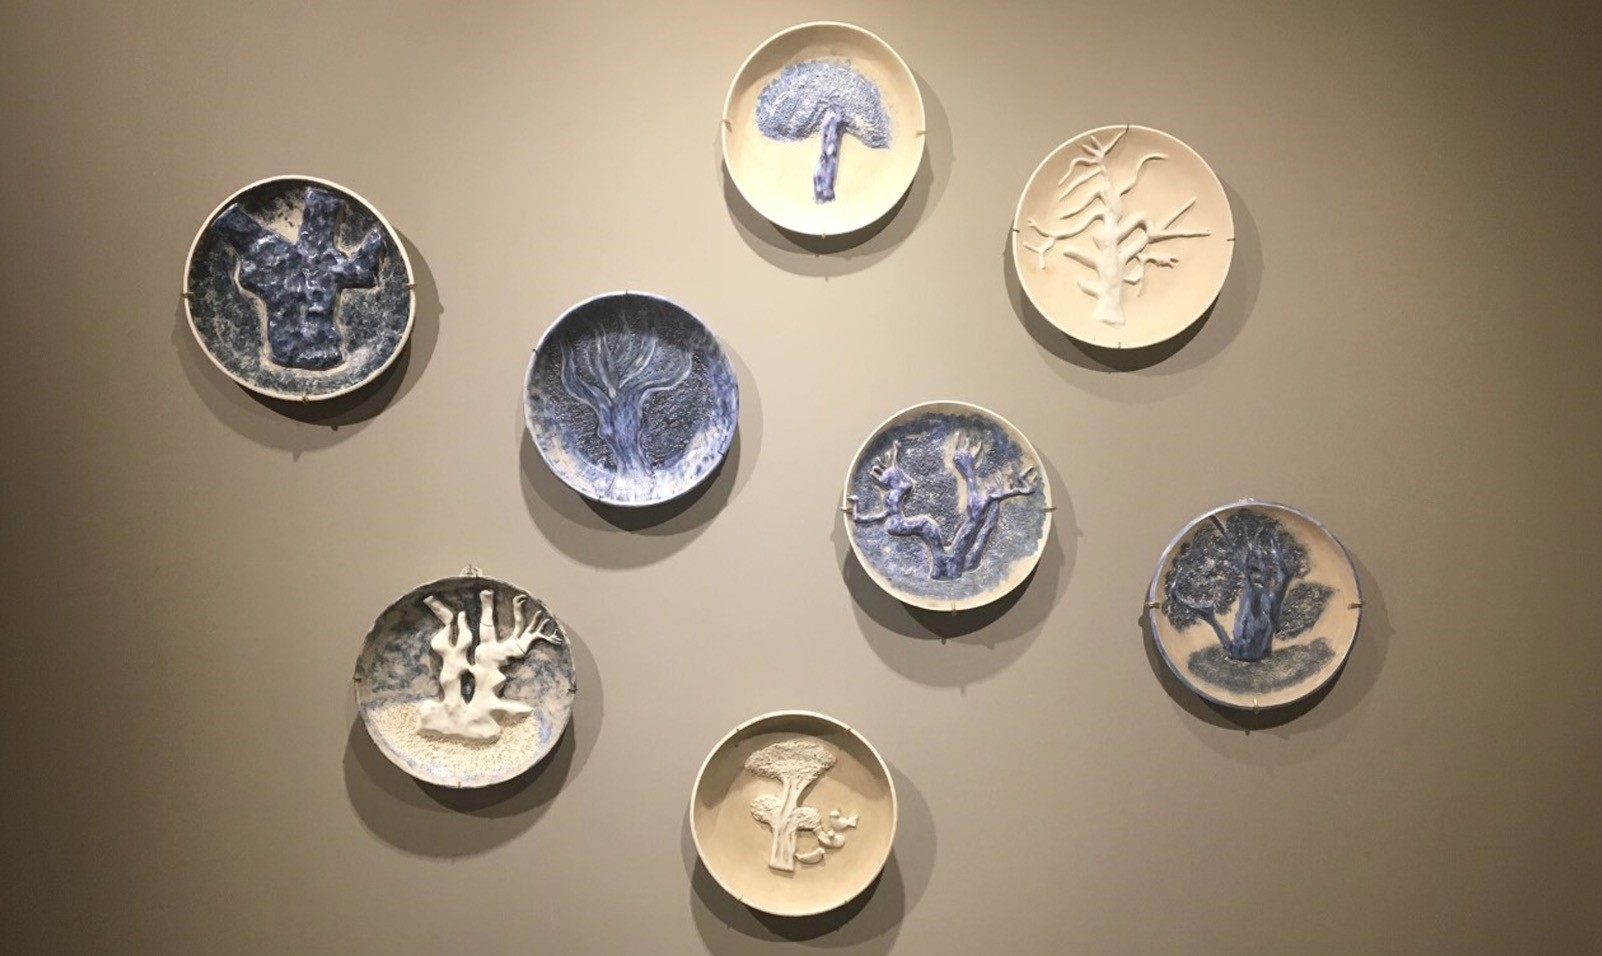 The plates represent her first masterfully creative phase designing ceramics with a syncretic sensibility for blending the themes of tradition and modernity into clay.